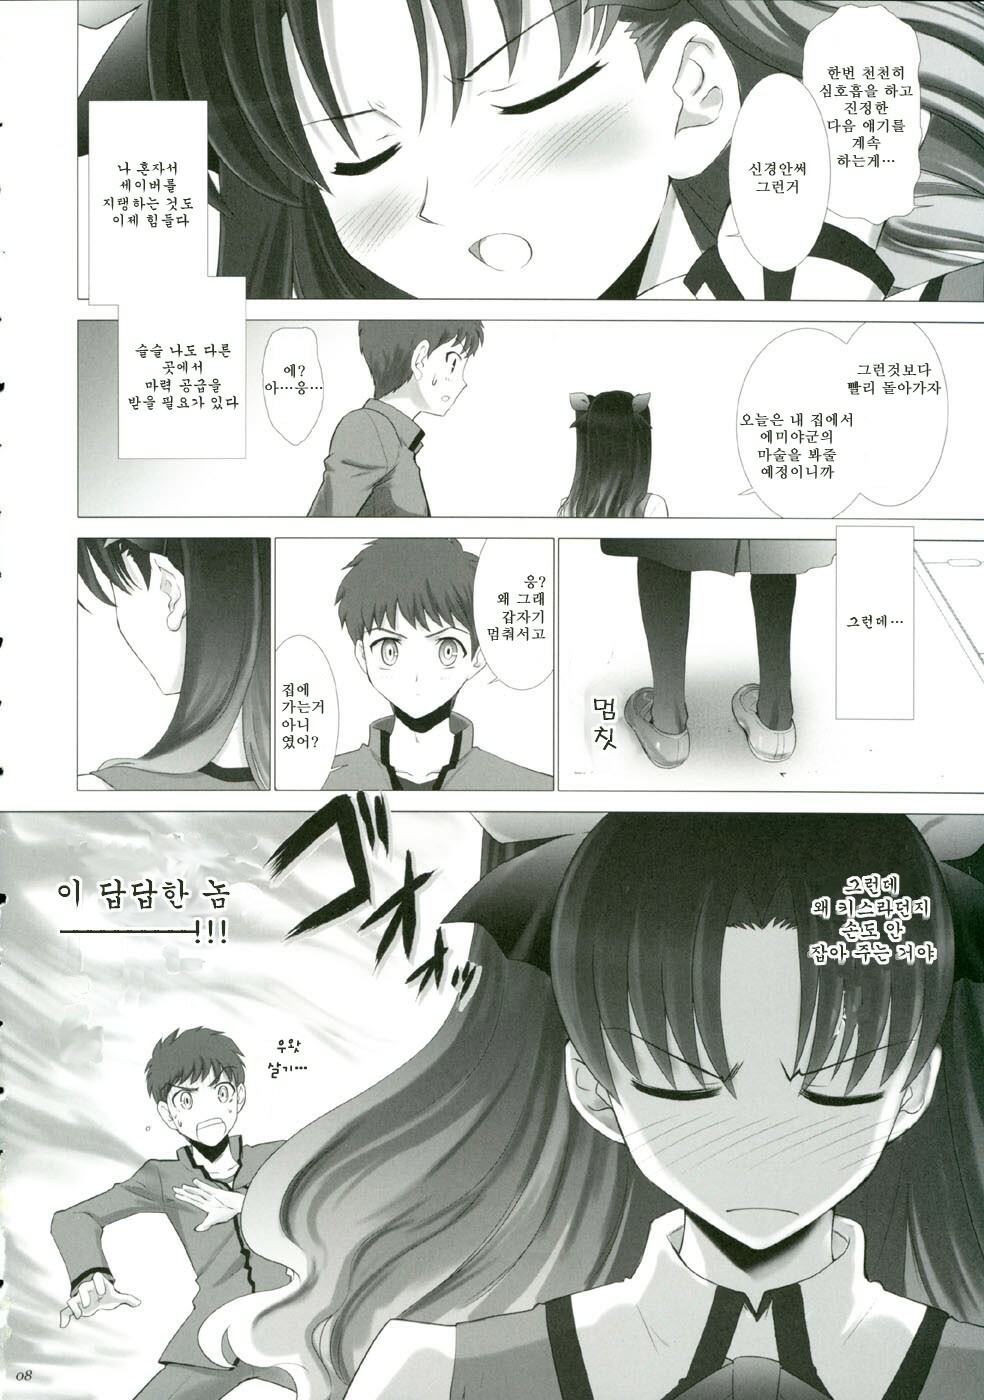 (CR35) [Crazy Clover Club (Shirotsumekusa)] T-MOON COMPLEX 3 (Fate/stay night) [Korean] page 7 full